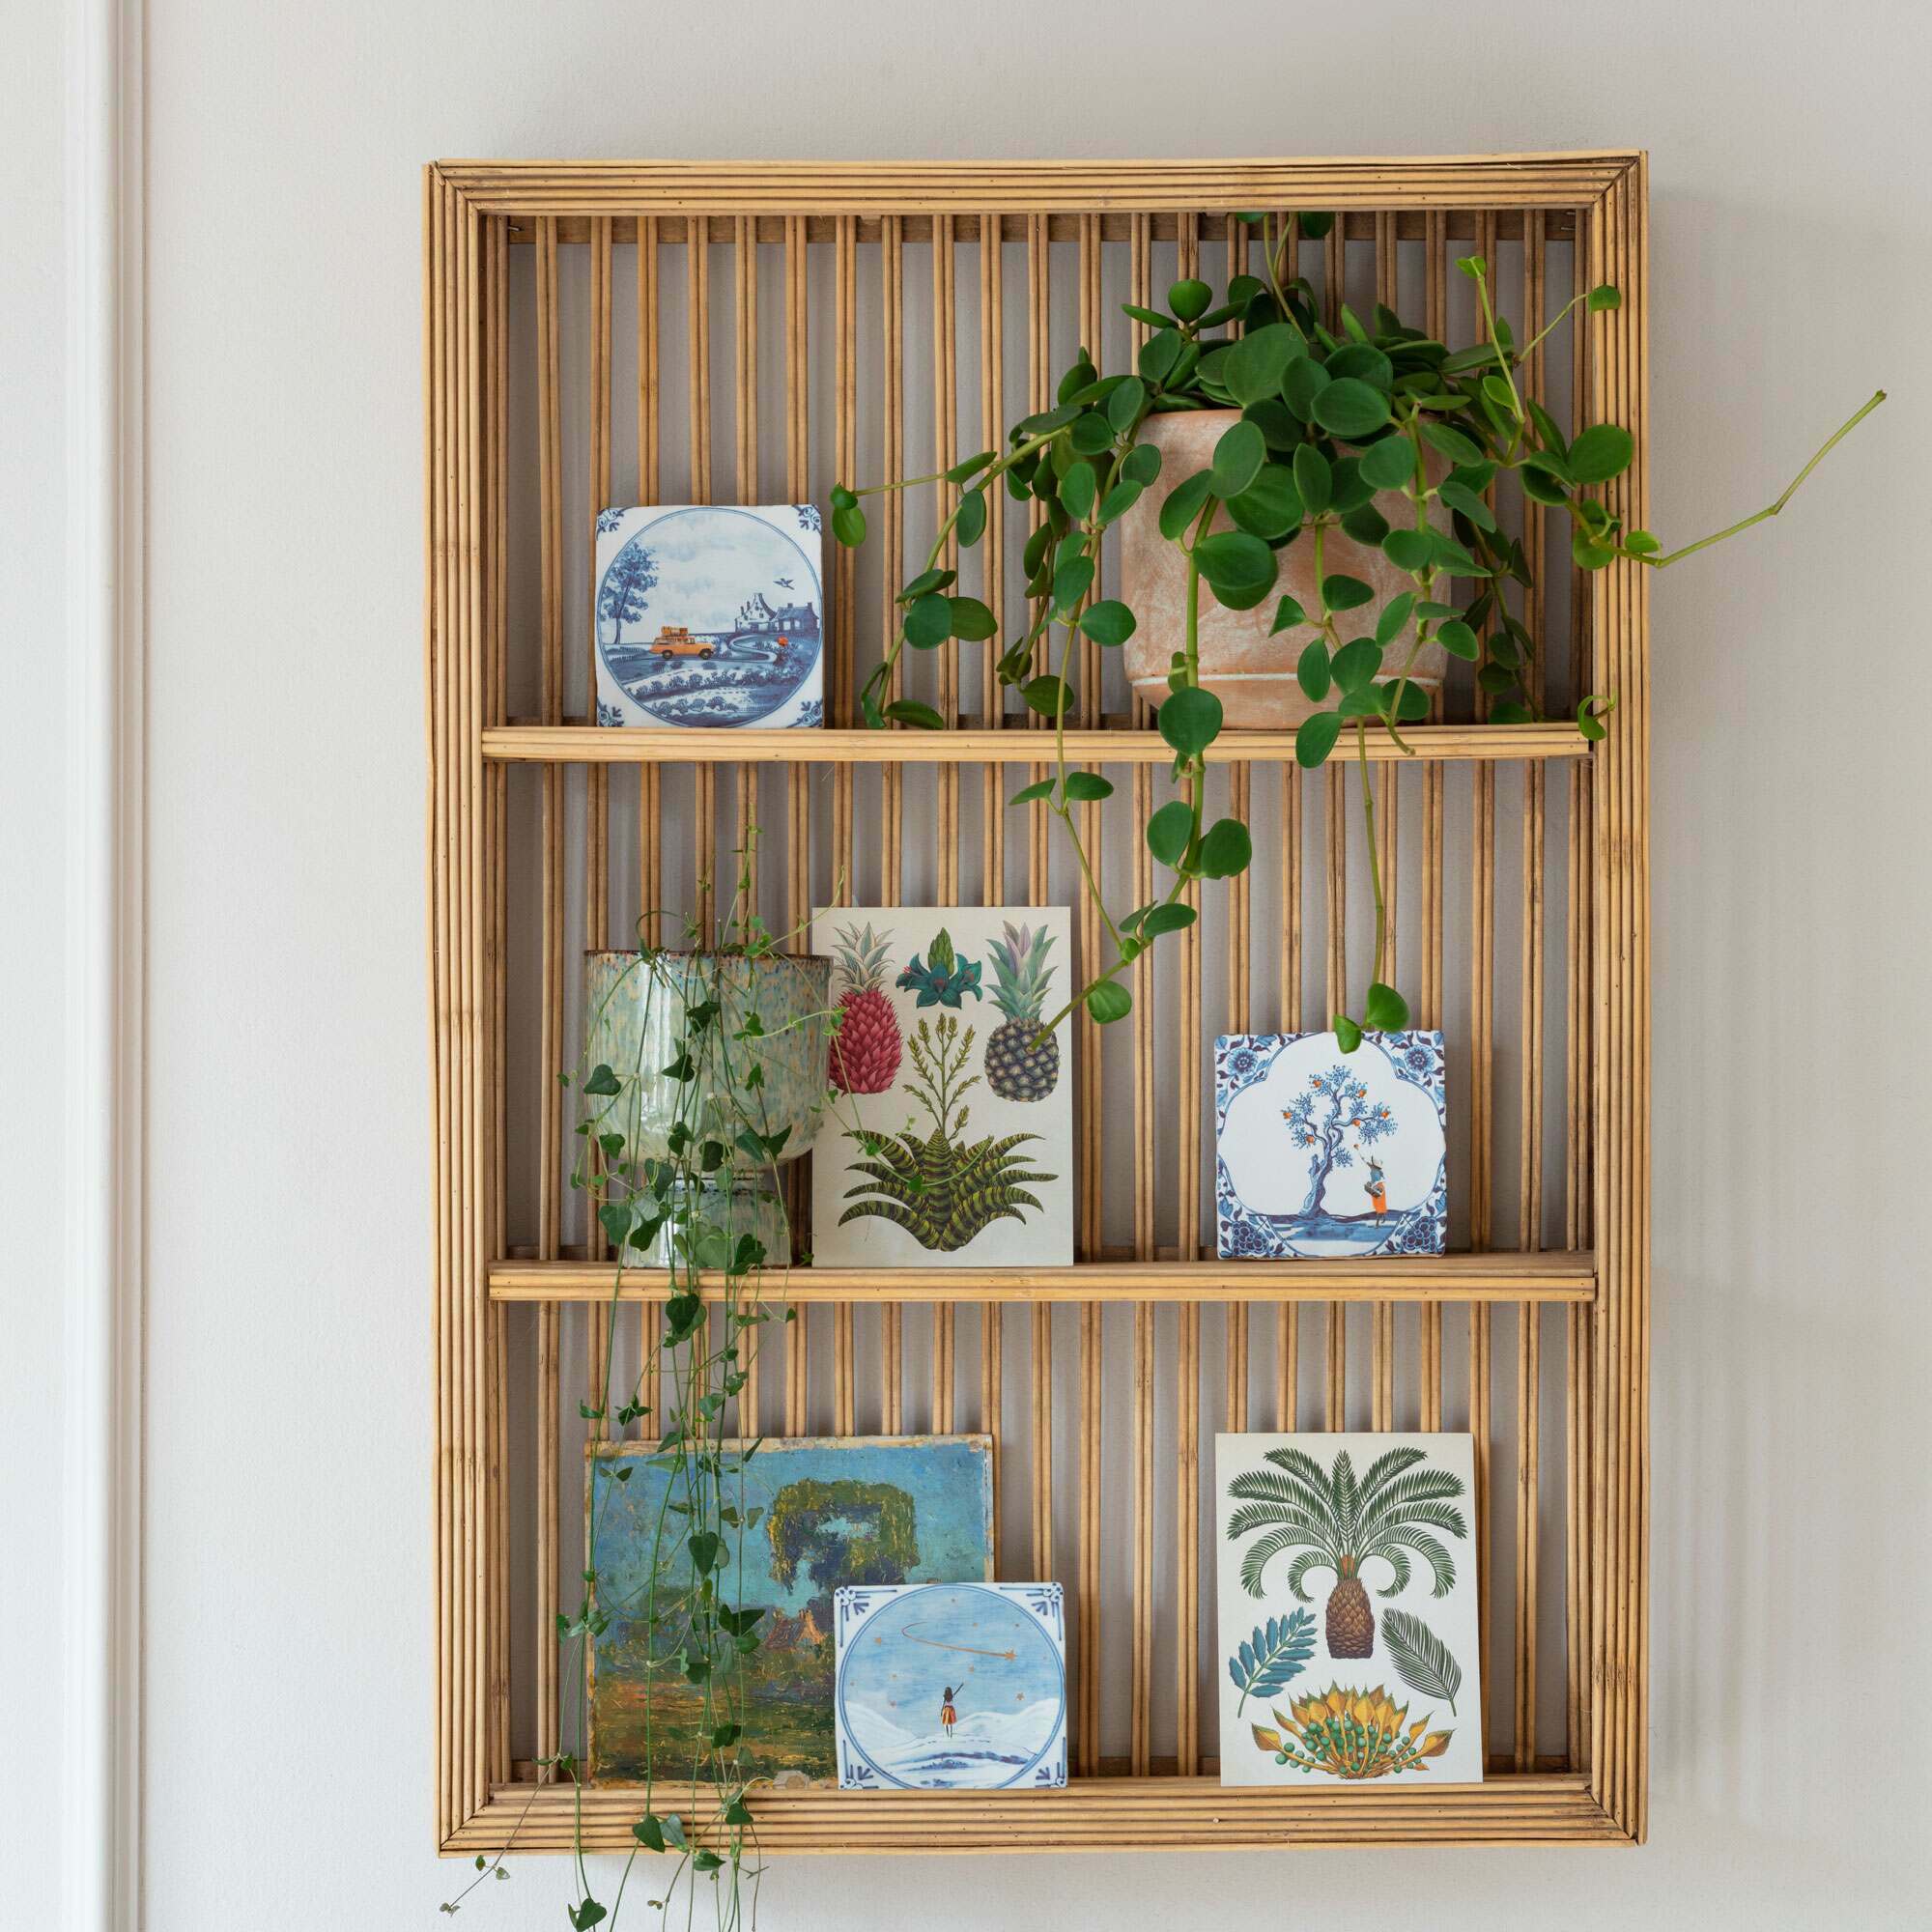 Read more about Graham and green rectangular bamboo shelving unit